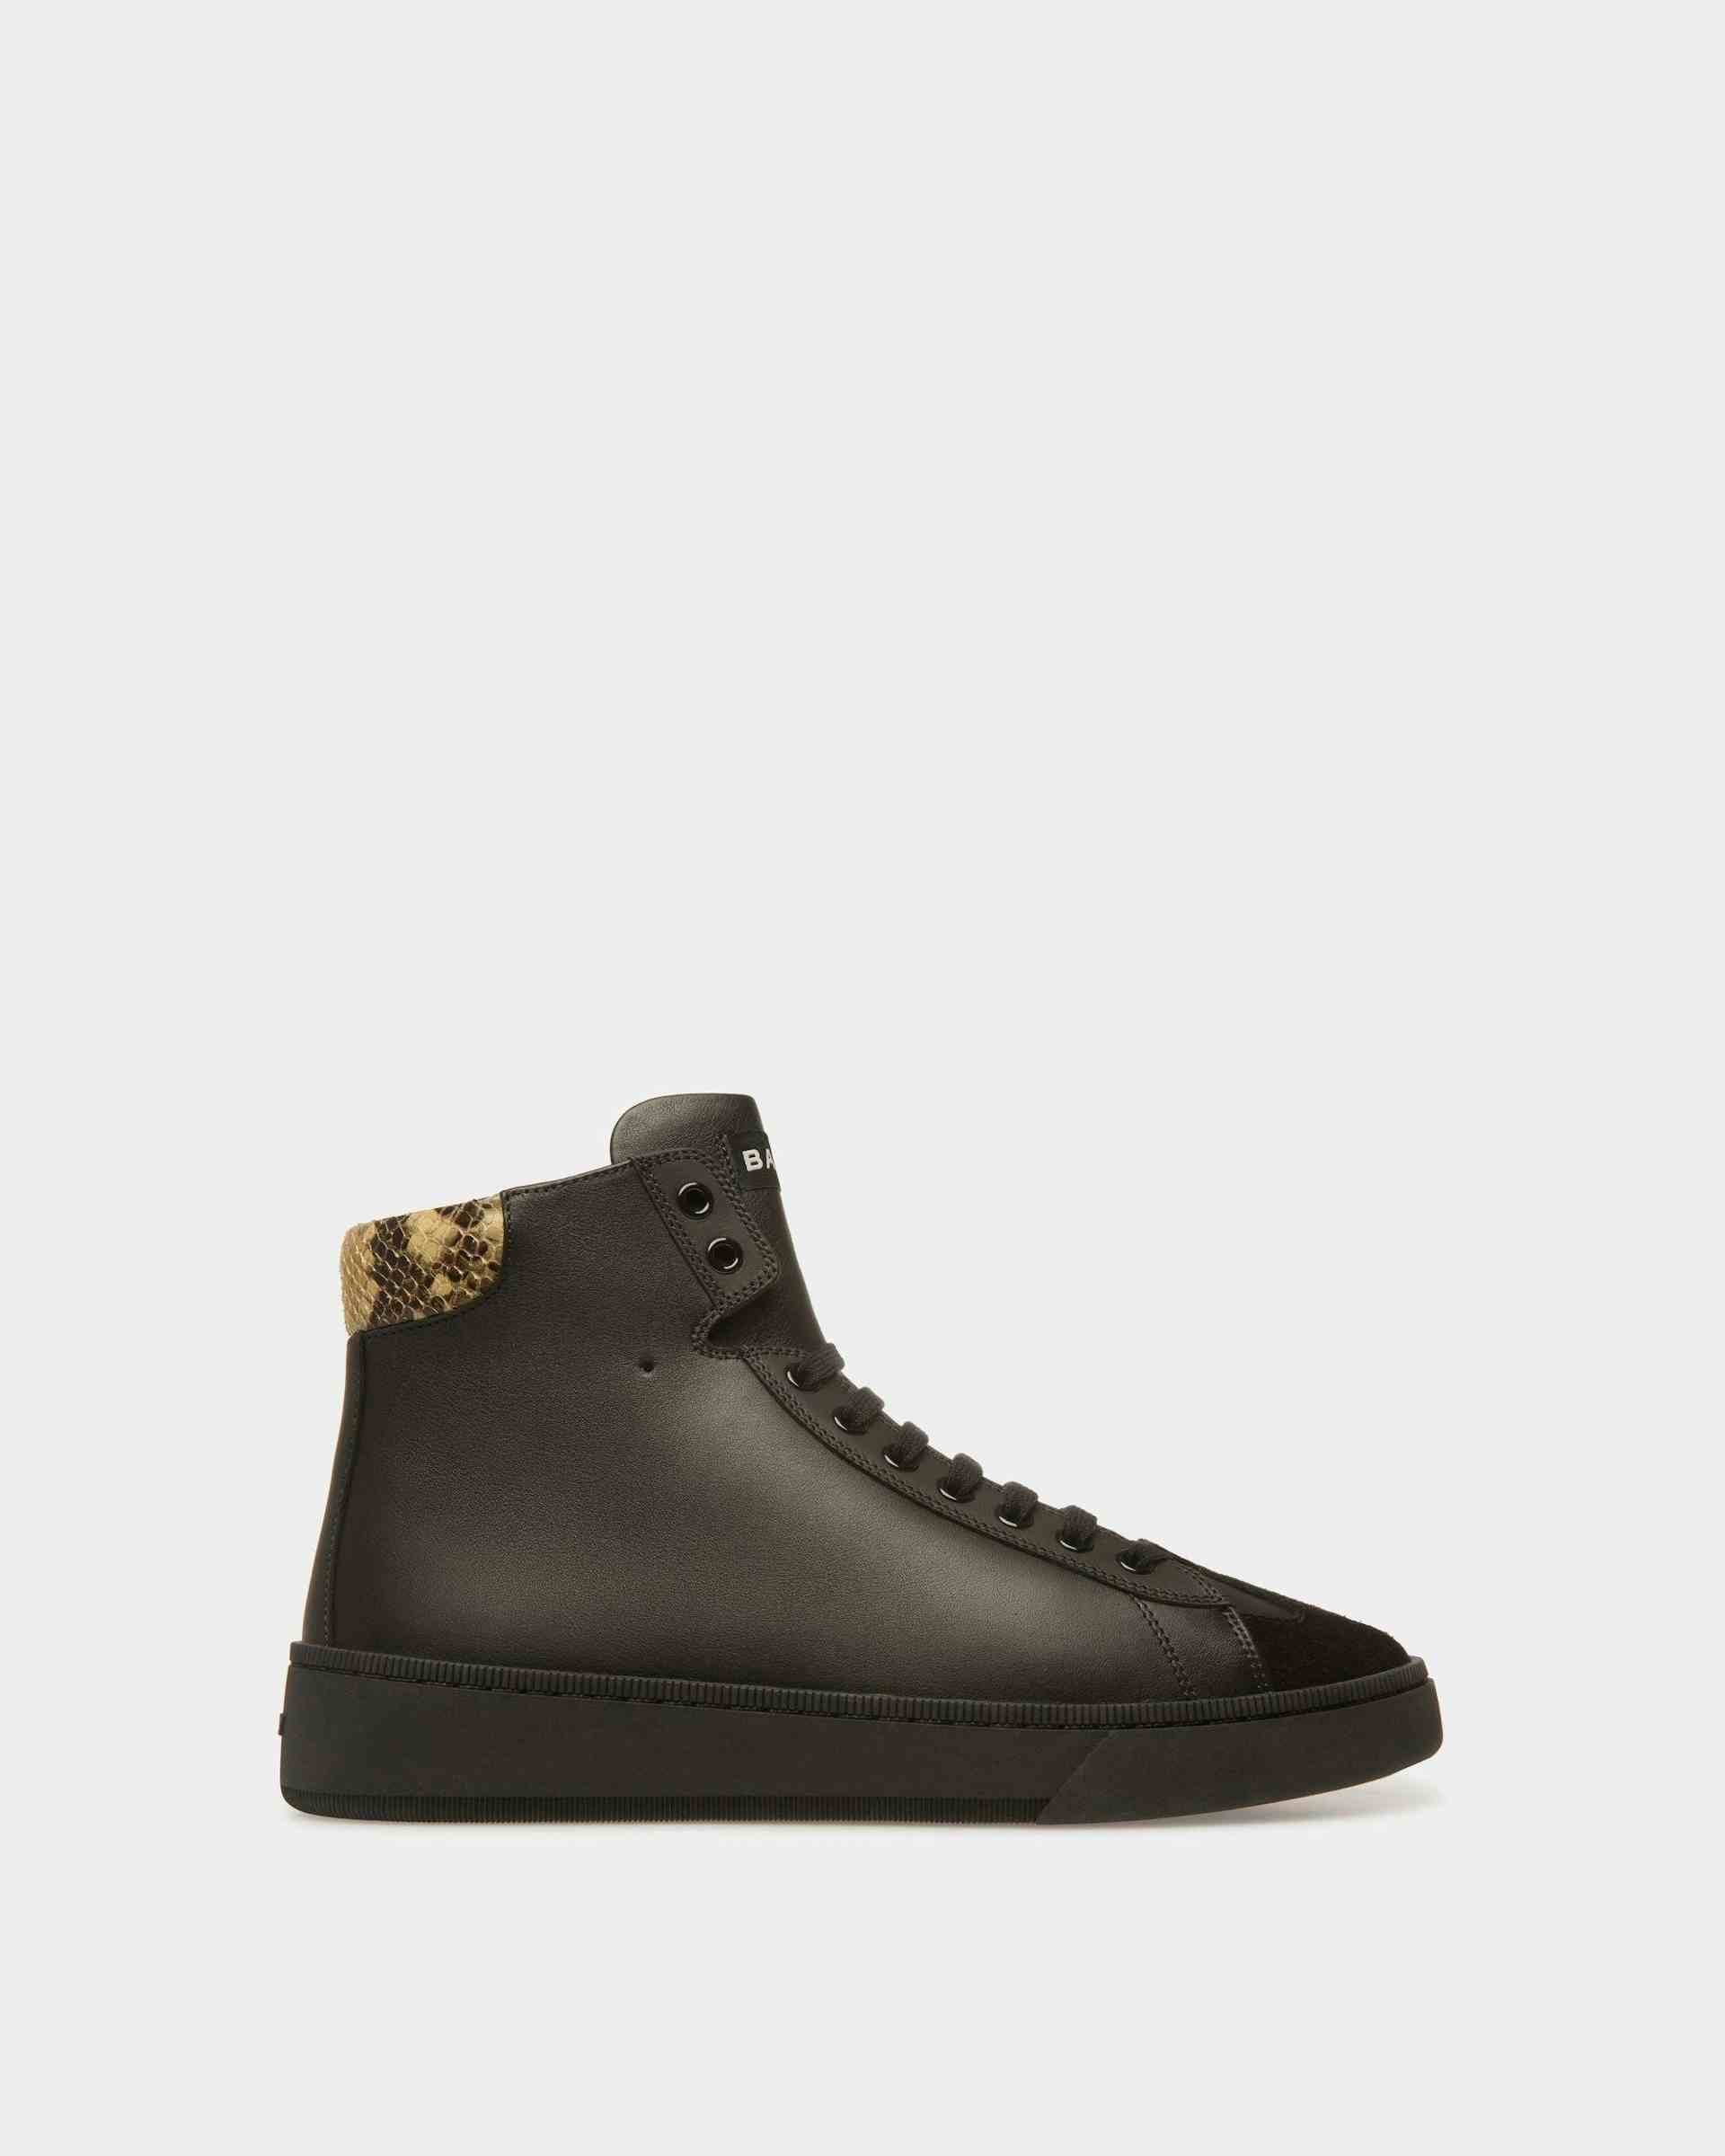 Raise Sneakers In Black And Python Print Leather - Men's - Bally